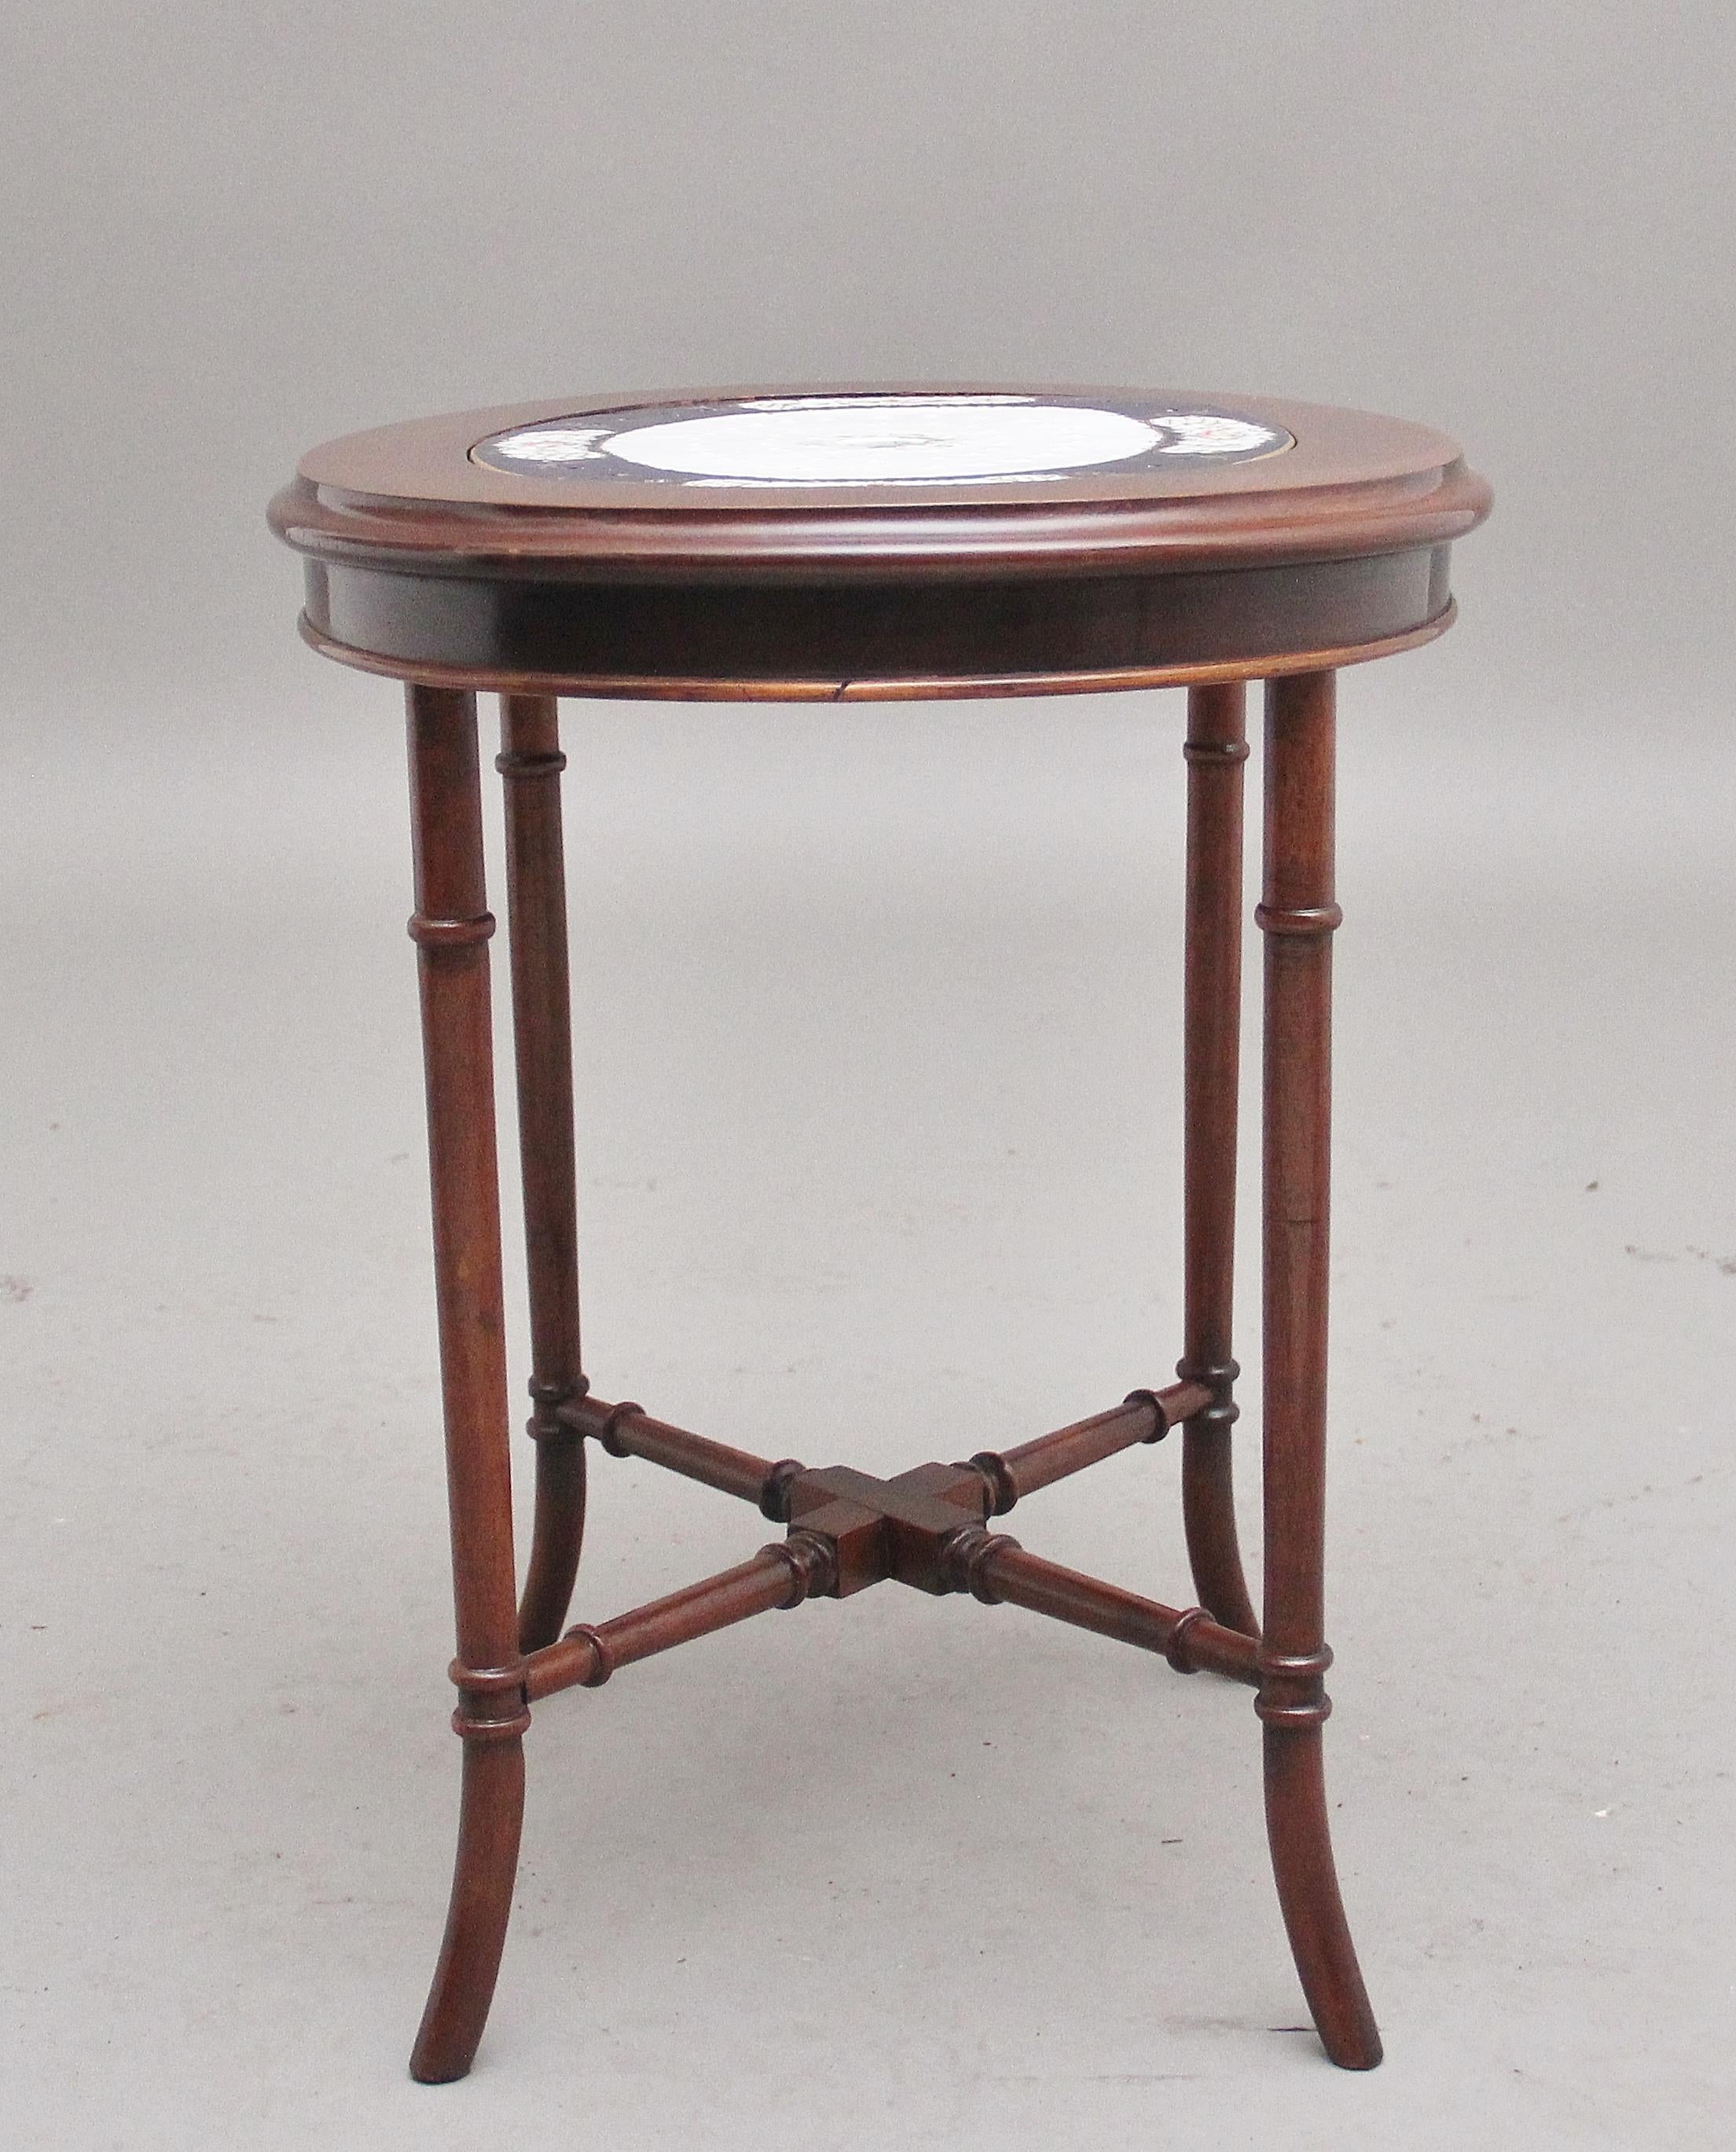 British Early 20th Century Mahogany Occasional Table with a Ceramic Inset